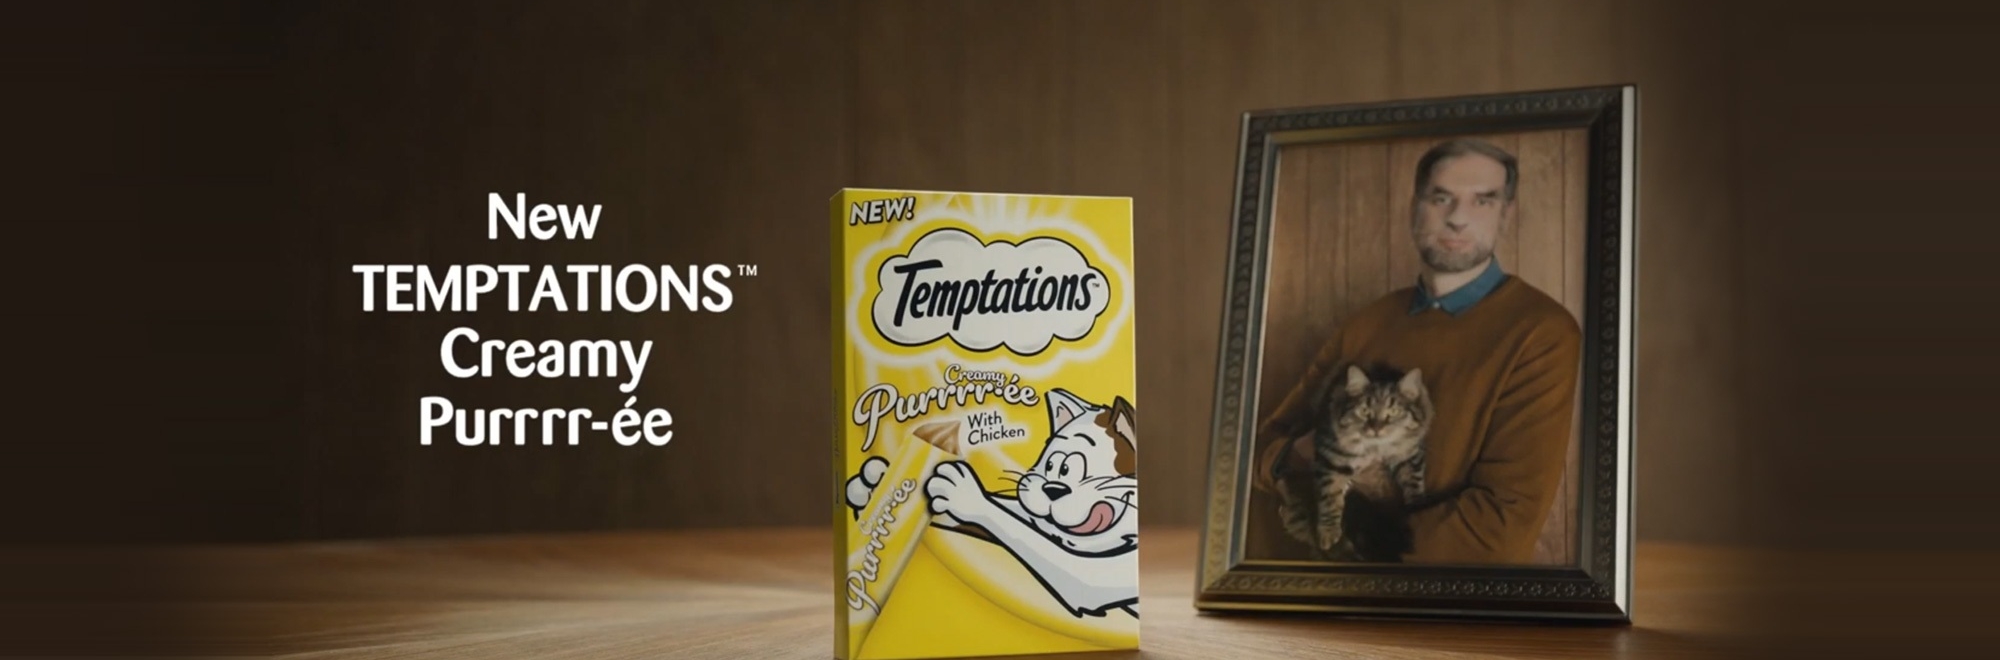 TEMPTATIONS Creamy Purrrr-ee means more time with your cat (maybe too much time)